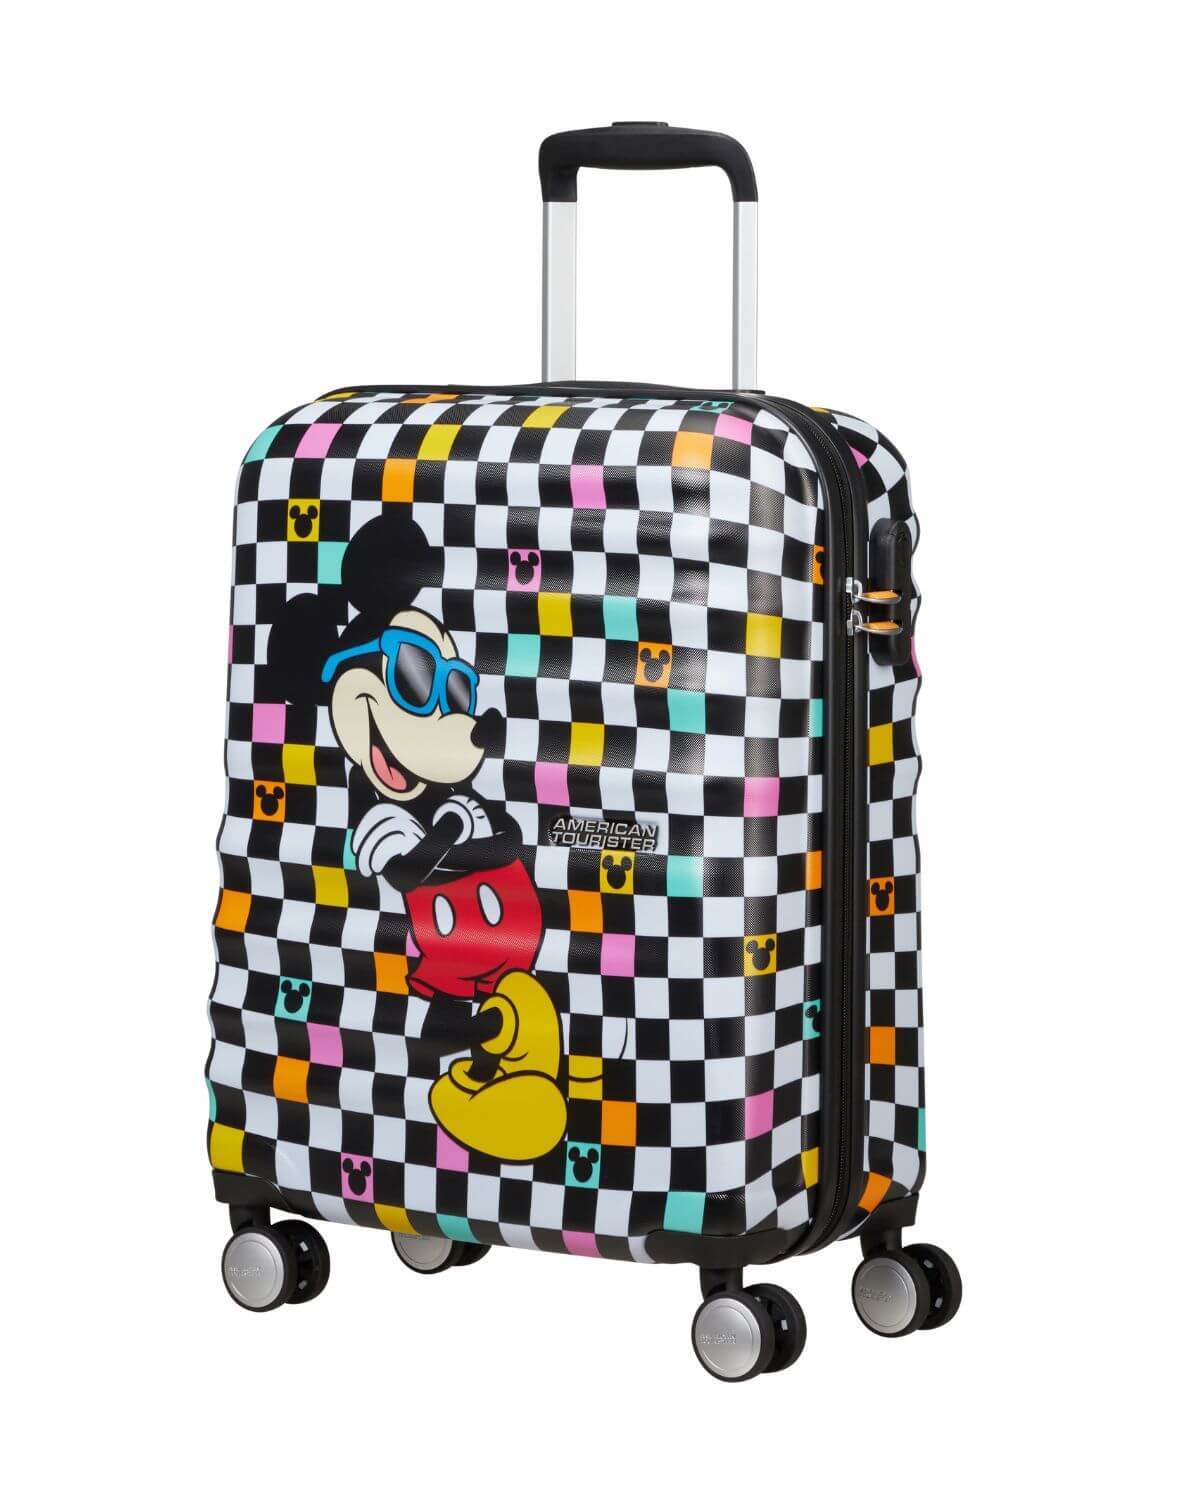 SPINNER AMERICAN TOURISTER MICKEY CHECK